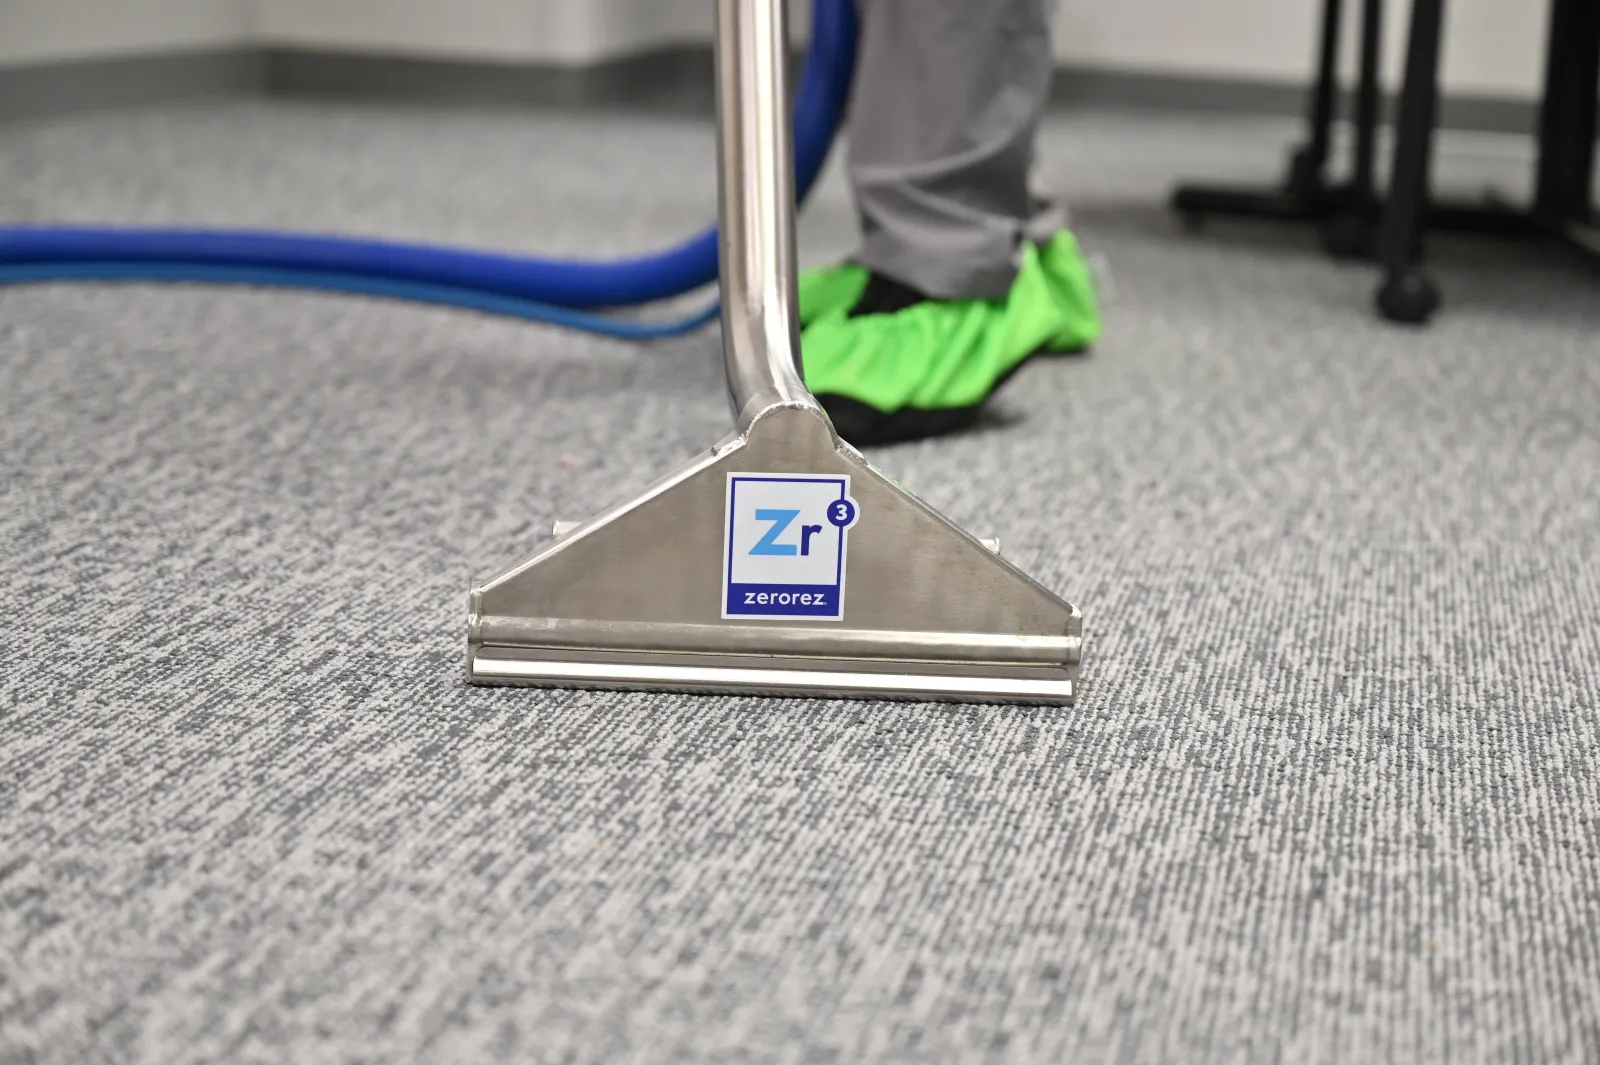 Zerorez® Zr Wand extracting and cleaning Berber carpets in a commercial office building